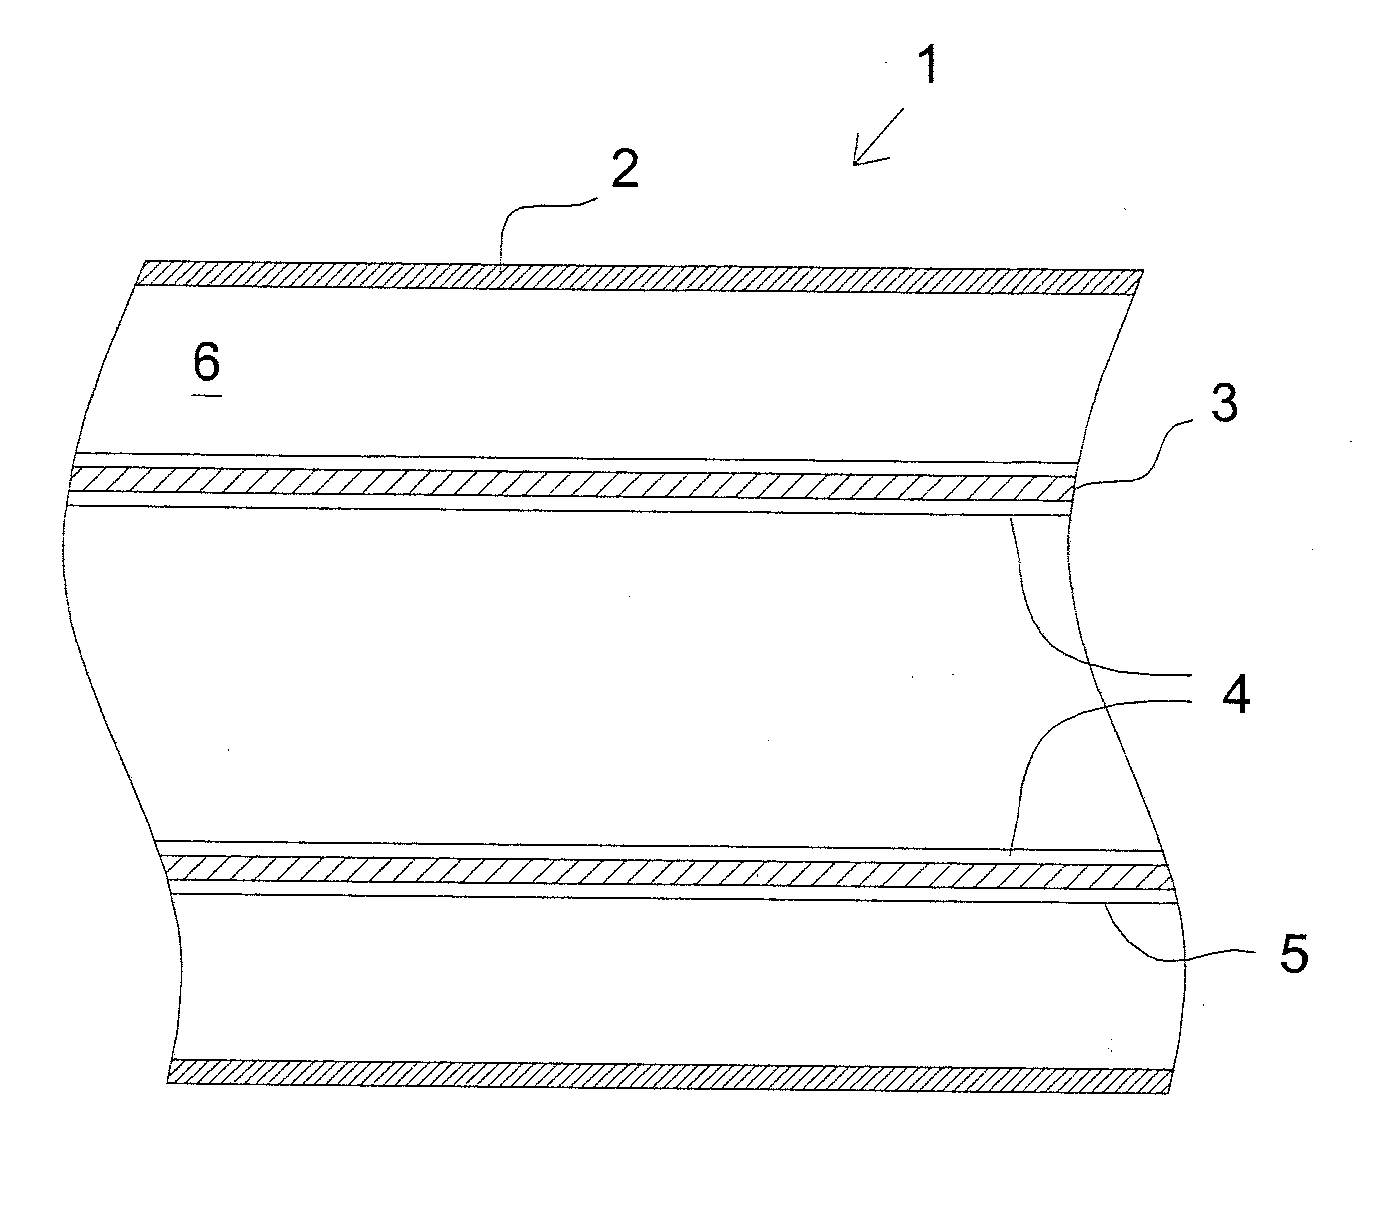 Tubular radiation absorbing device for a solar power plant with reduced heat losses